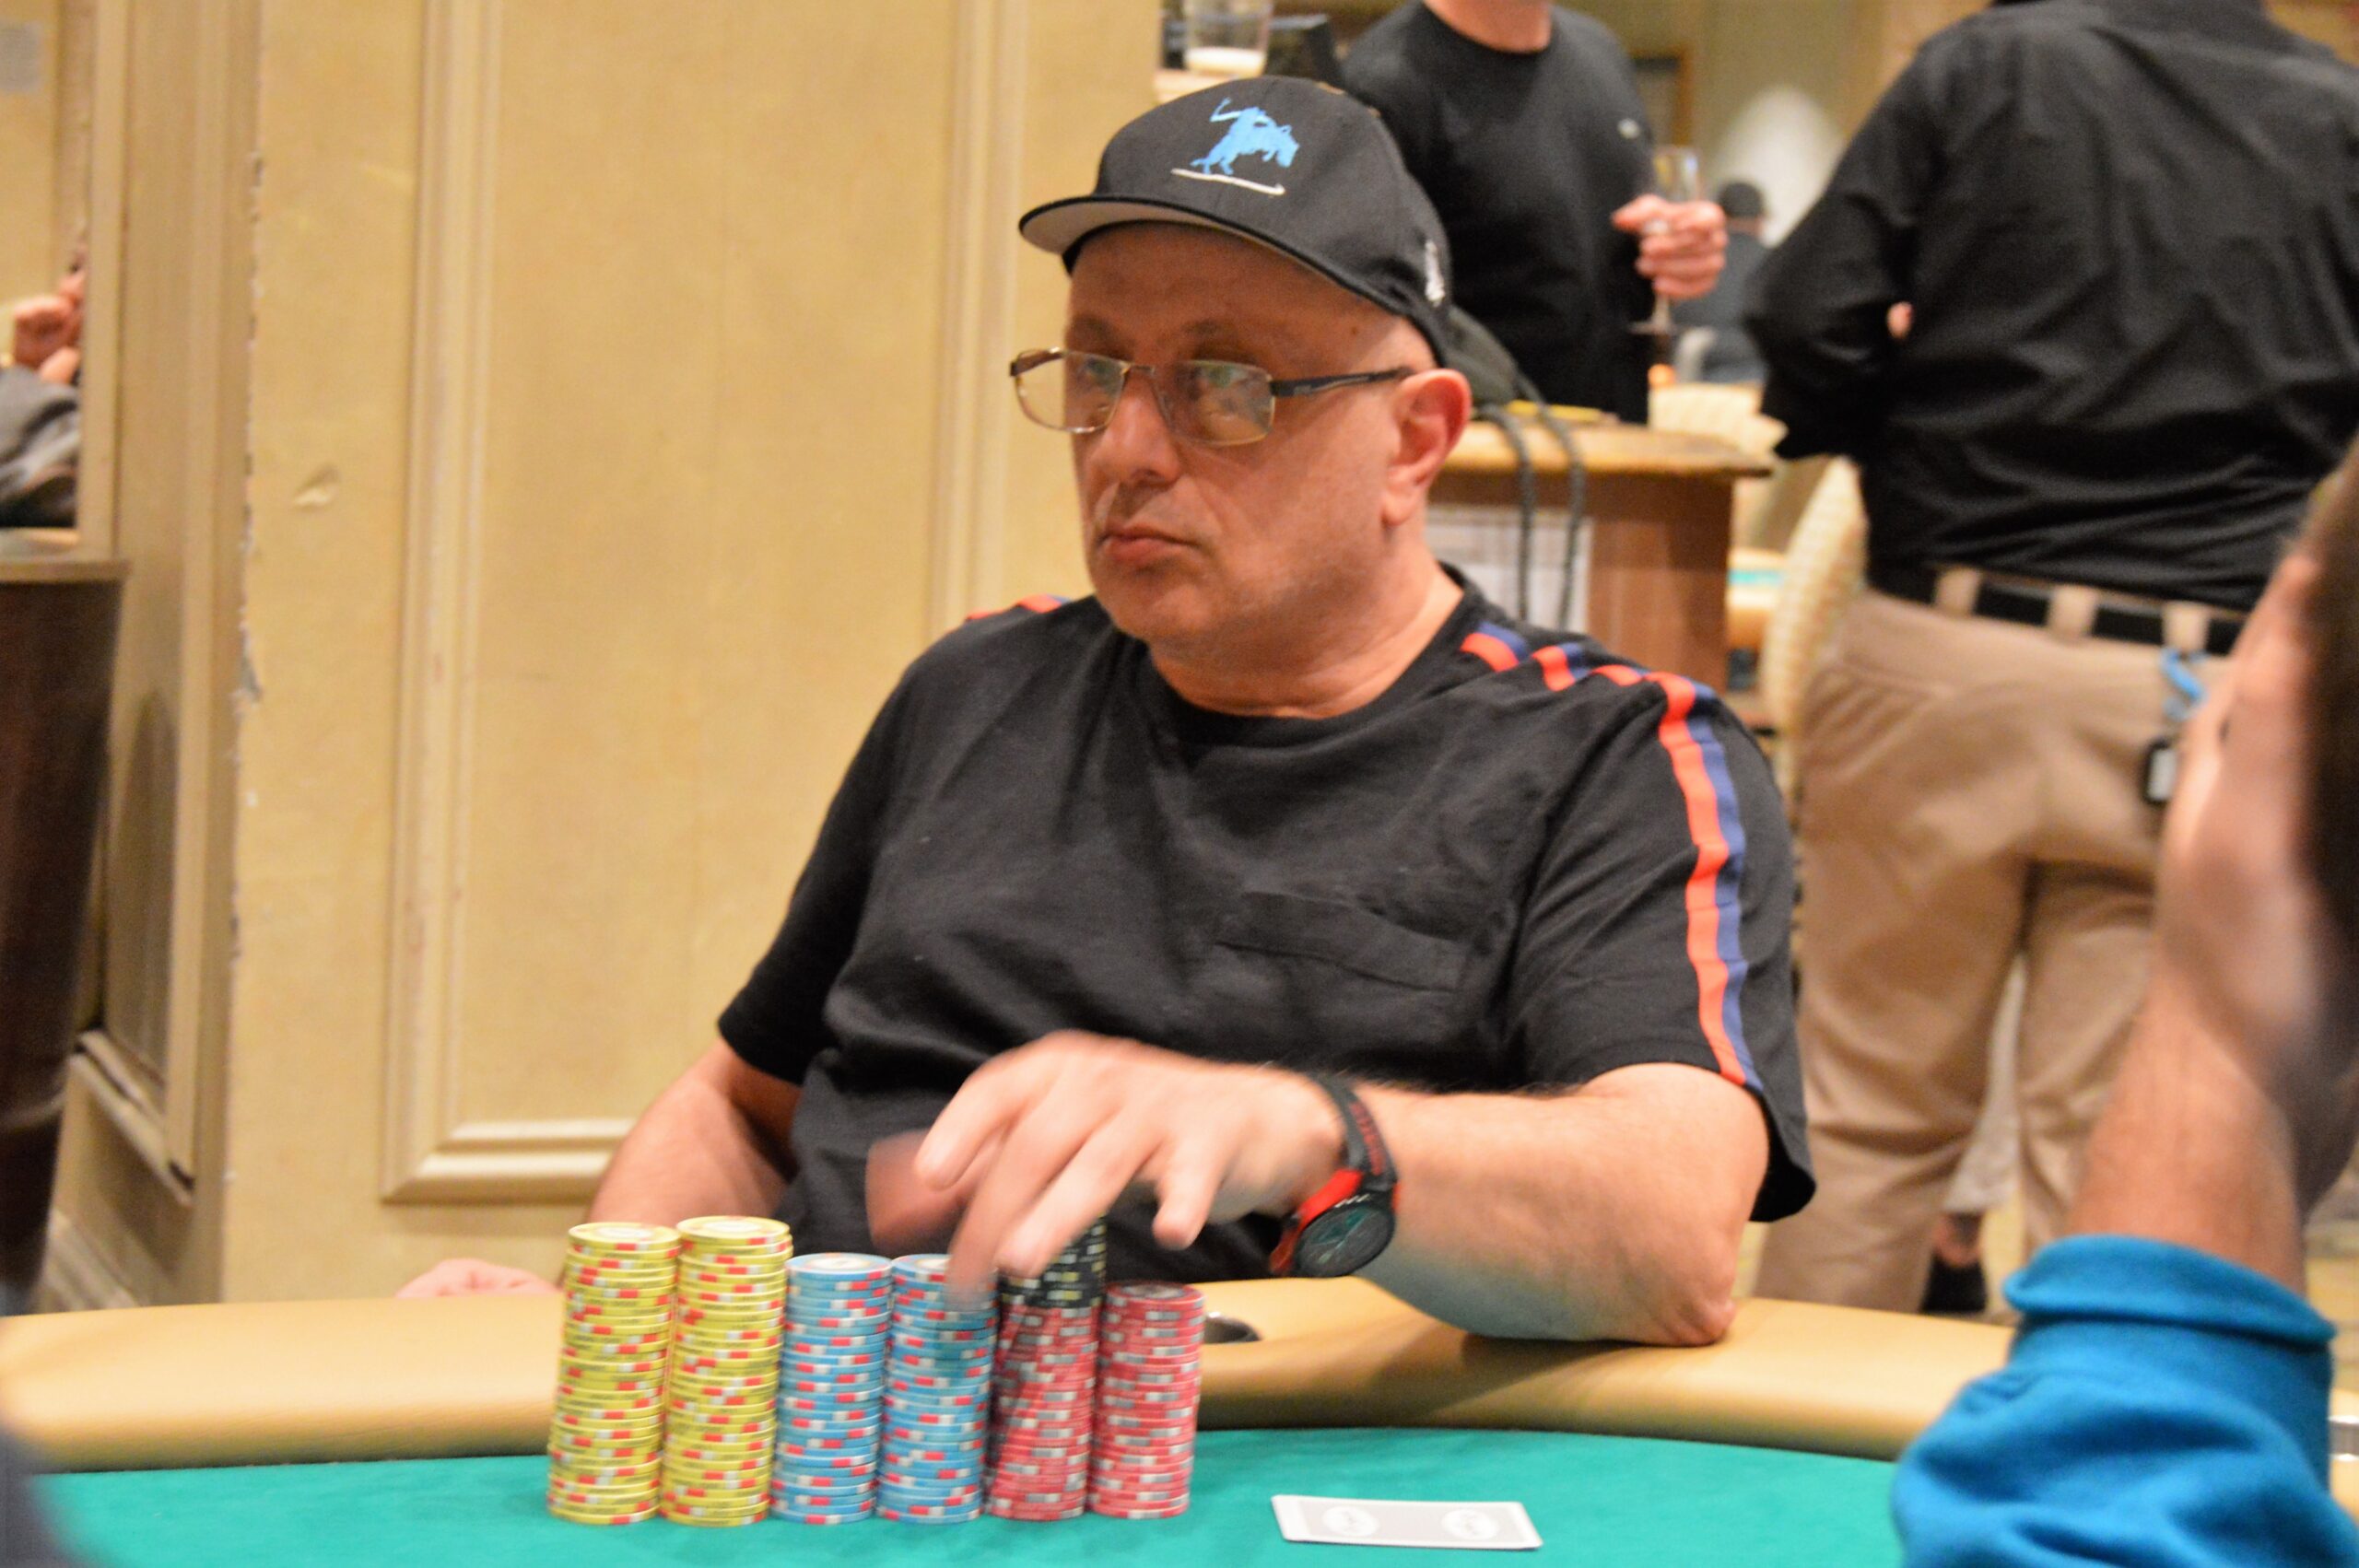 Roland Israelashvili (Who You’ve Probably Never Heard of) Just Booked His 94th WSOP Cash